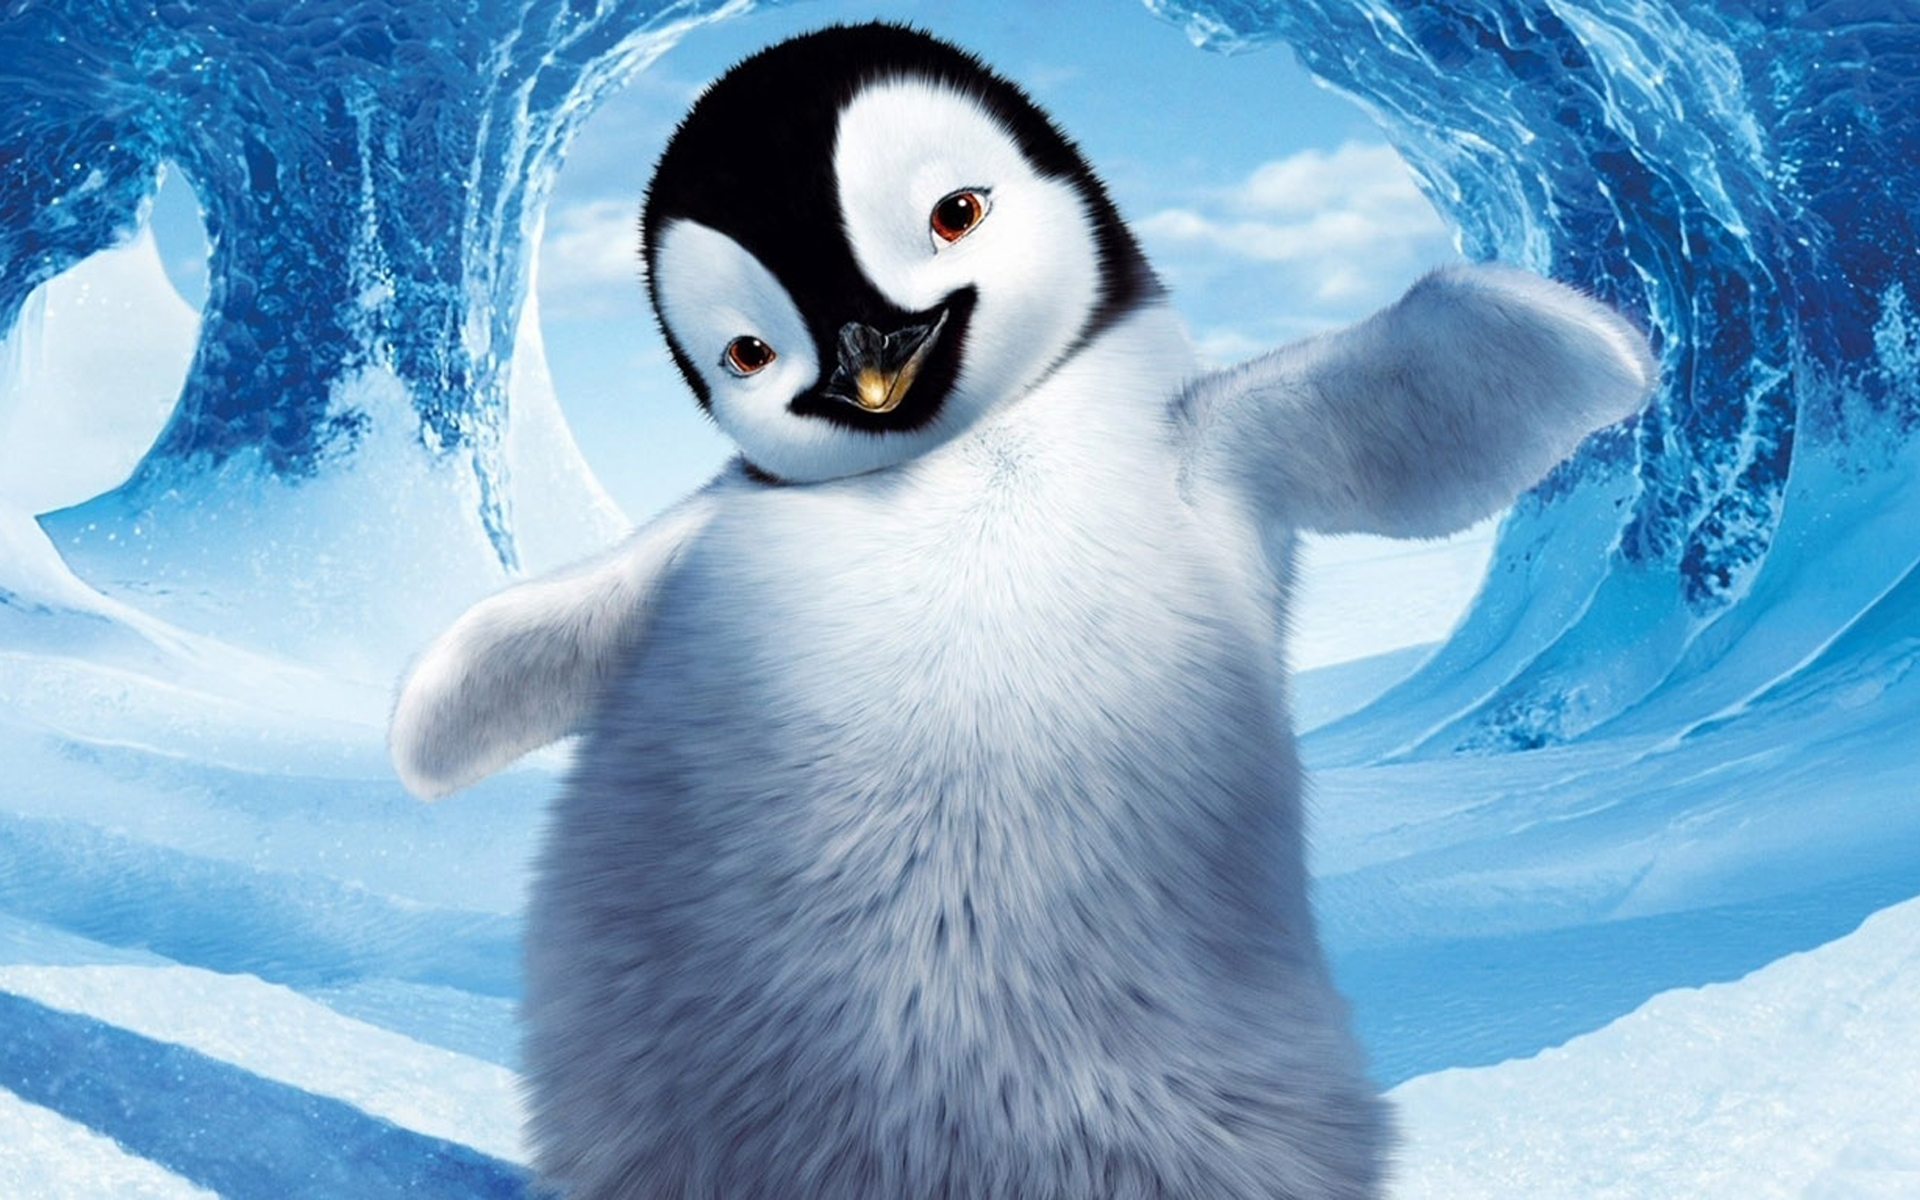 Happy Penguin wallpapers and images